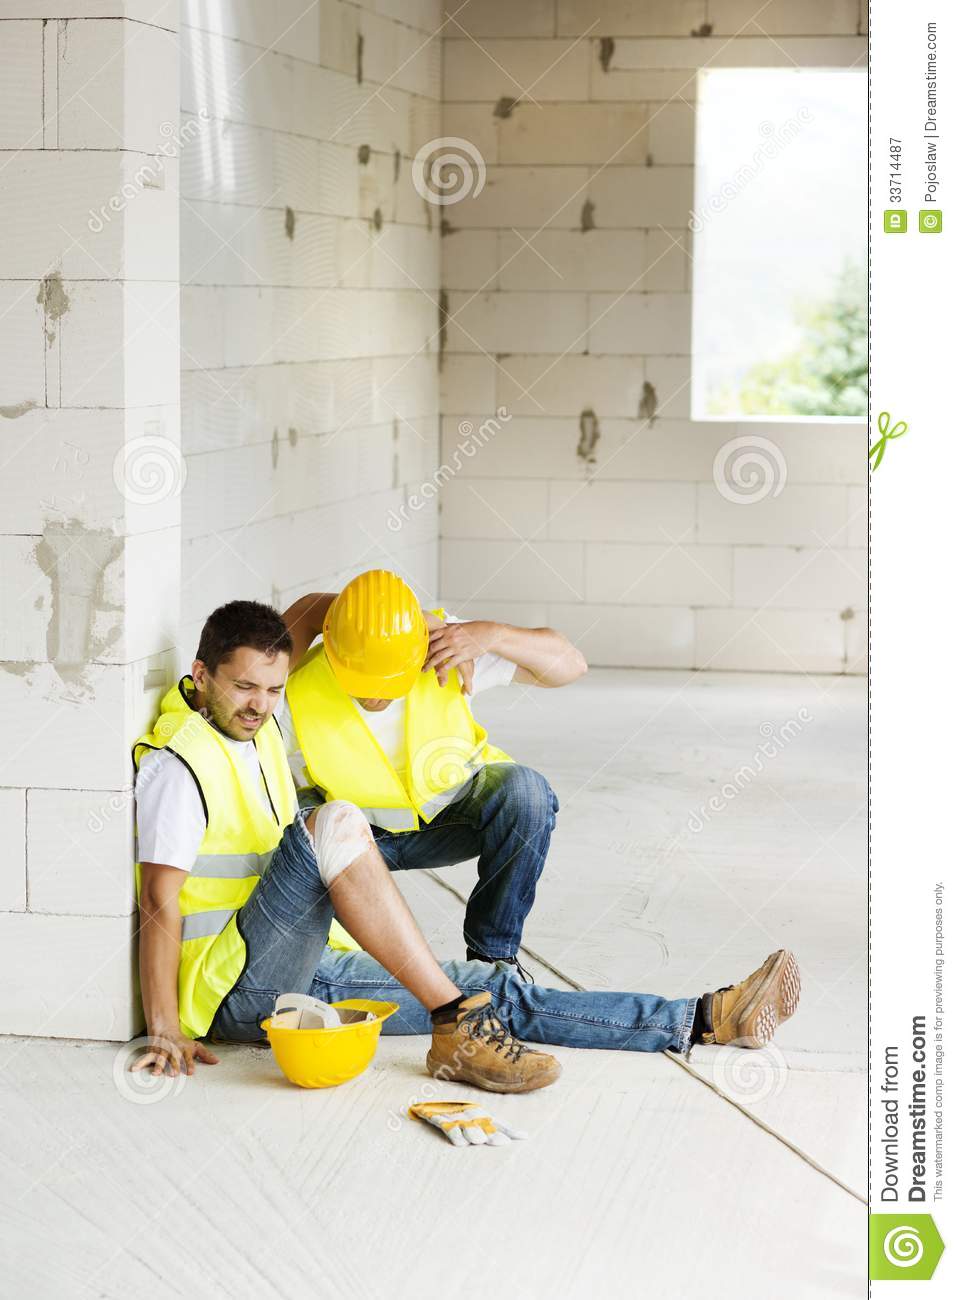 Construction Accident Royalty Free Stock Photography   Image  33714487